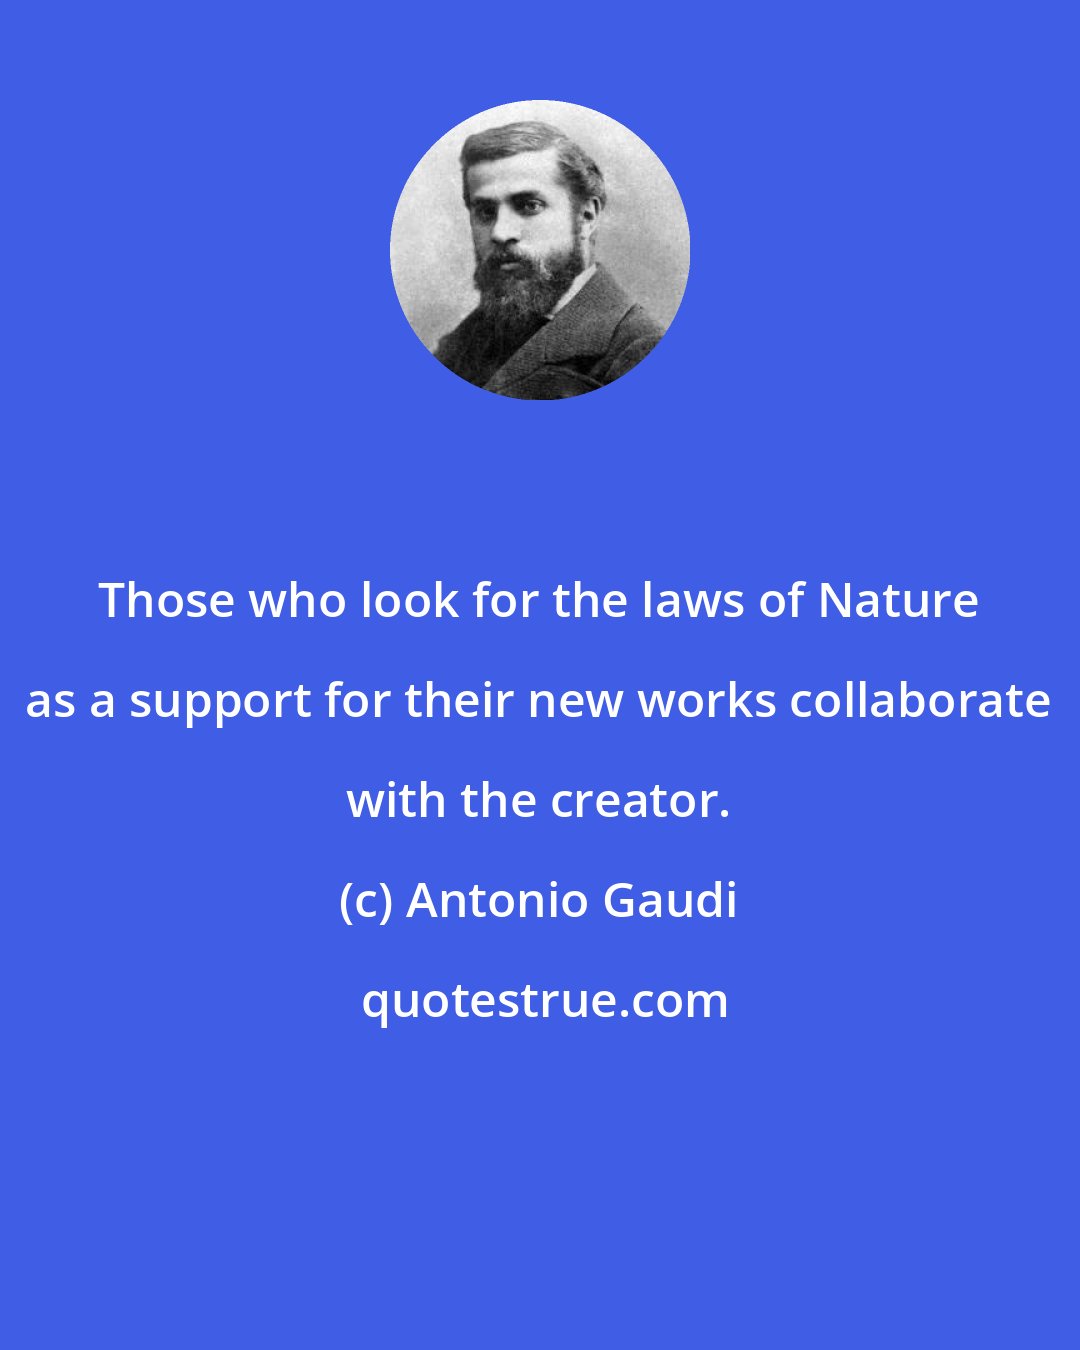 Antonio Gaudi: Those who look for the laws of Nature as a support for their new works collaborate with the creator.